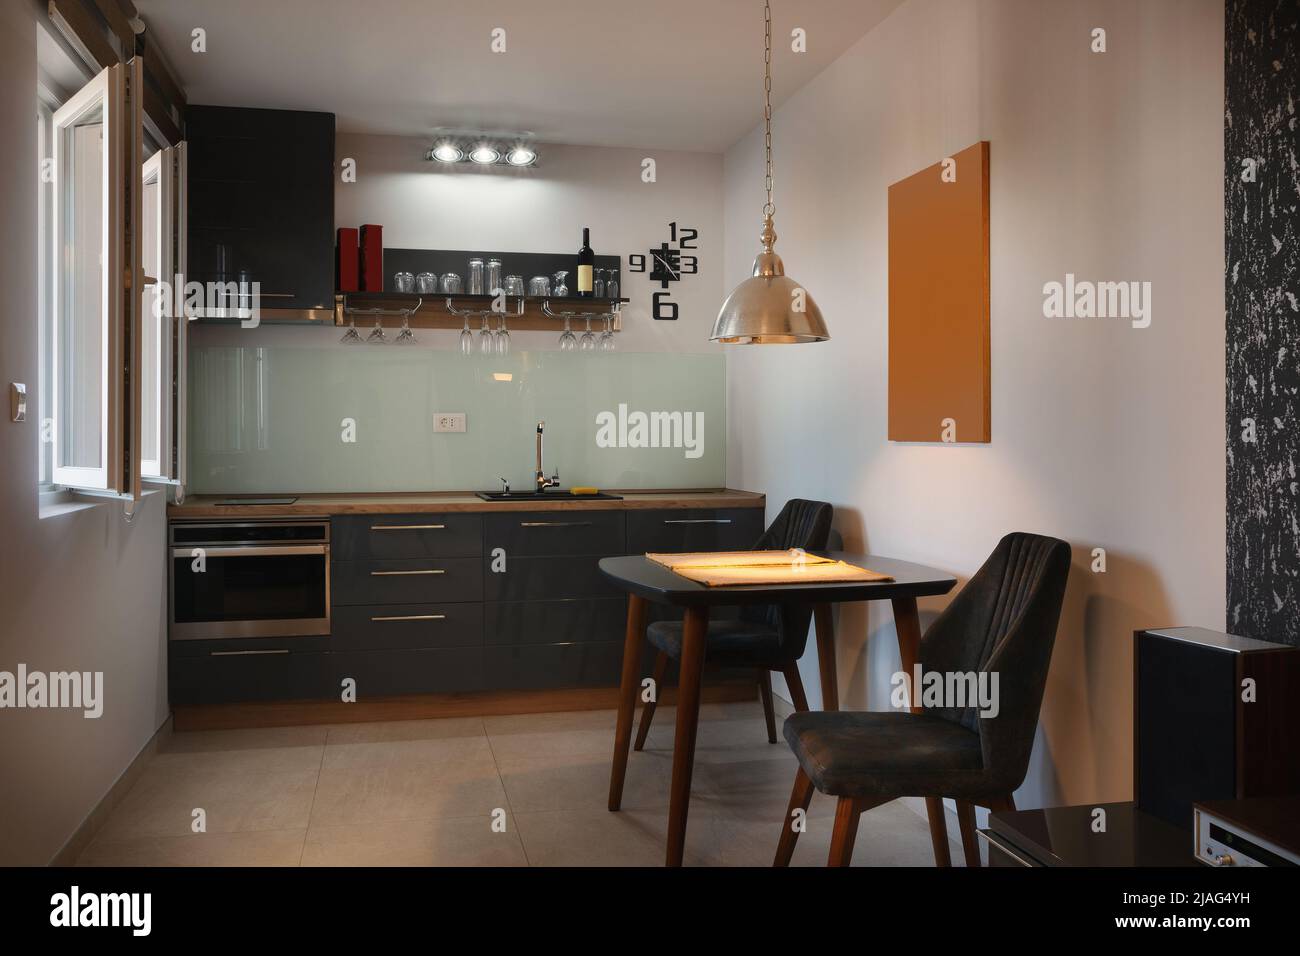 Interior of a new and modern apartment, prepared for renting, details of a small kitchen. Stock Photo